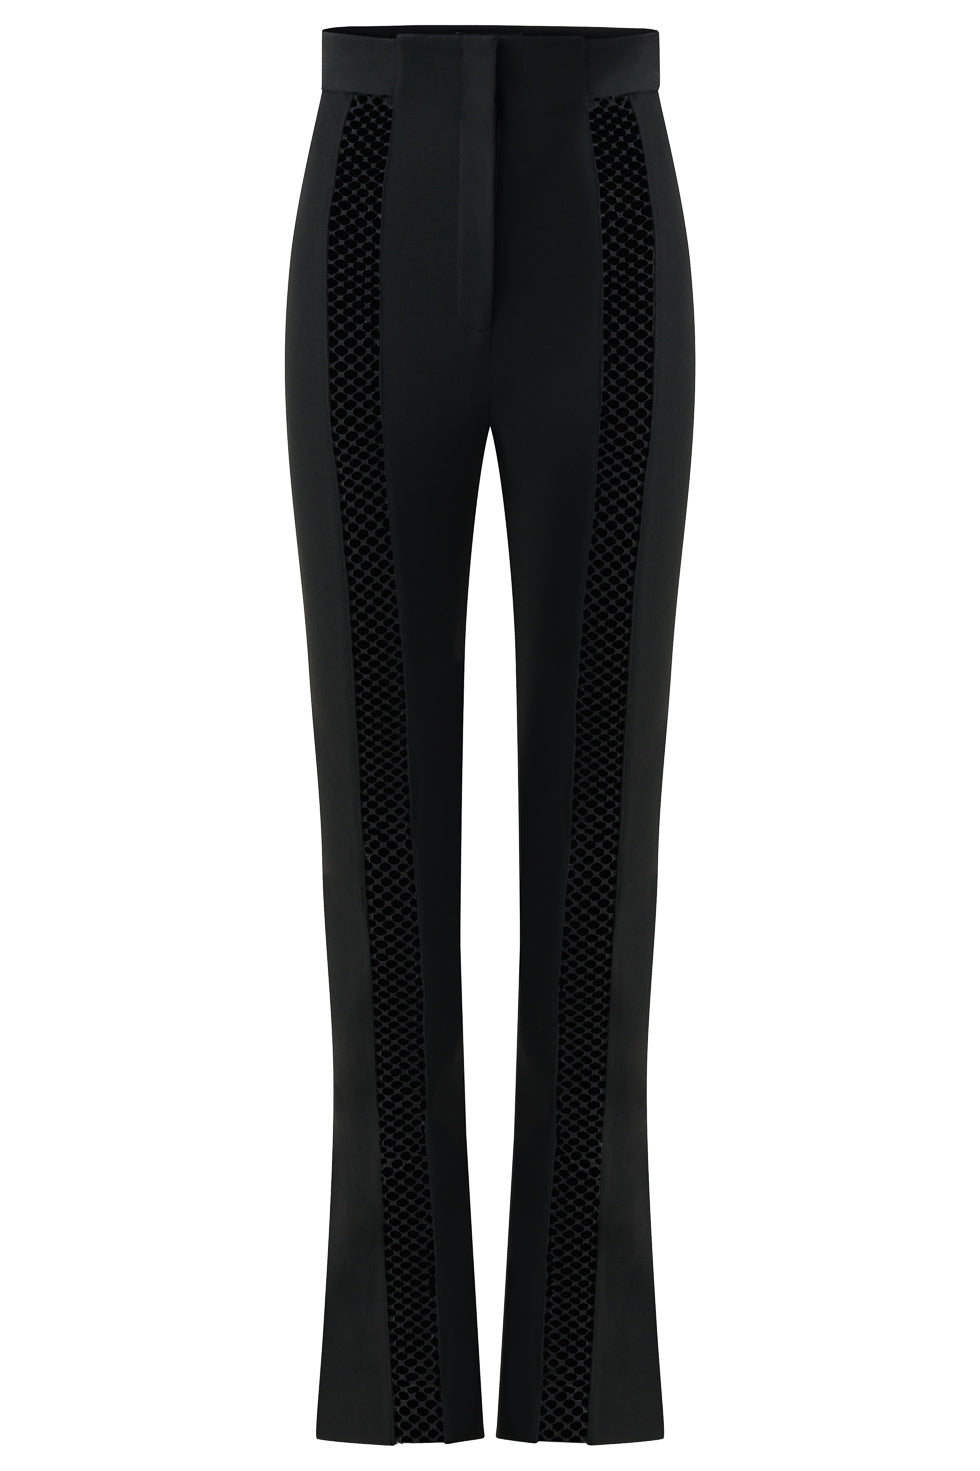 Florence Black Trimmed trousers